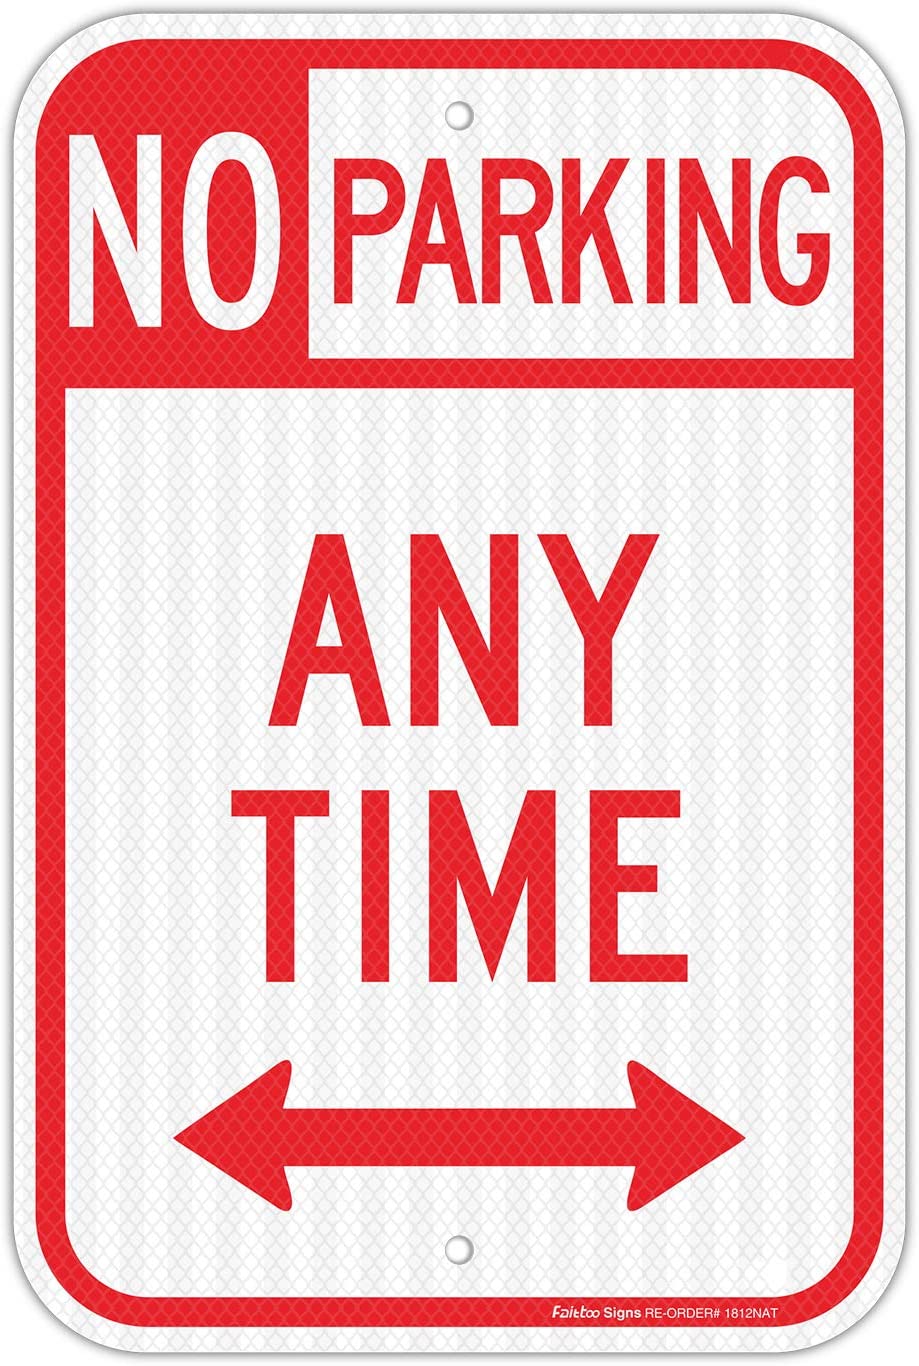 No Parking Anytime Sign with Arrows, No Parking Sign, 18 x 12 Inches Engineer Grade Reflective Sheeting Rust Free Aluminum, Weather Resistant, Waterproof, Durable Ink, Easy to Mount